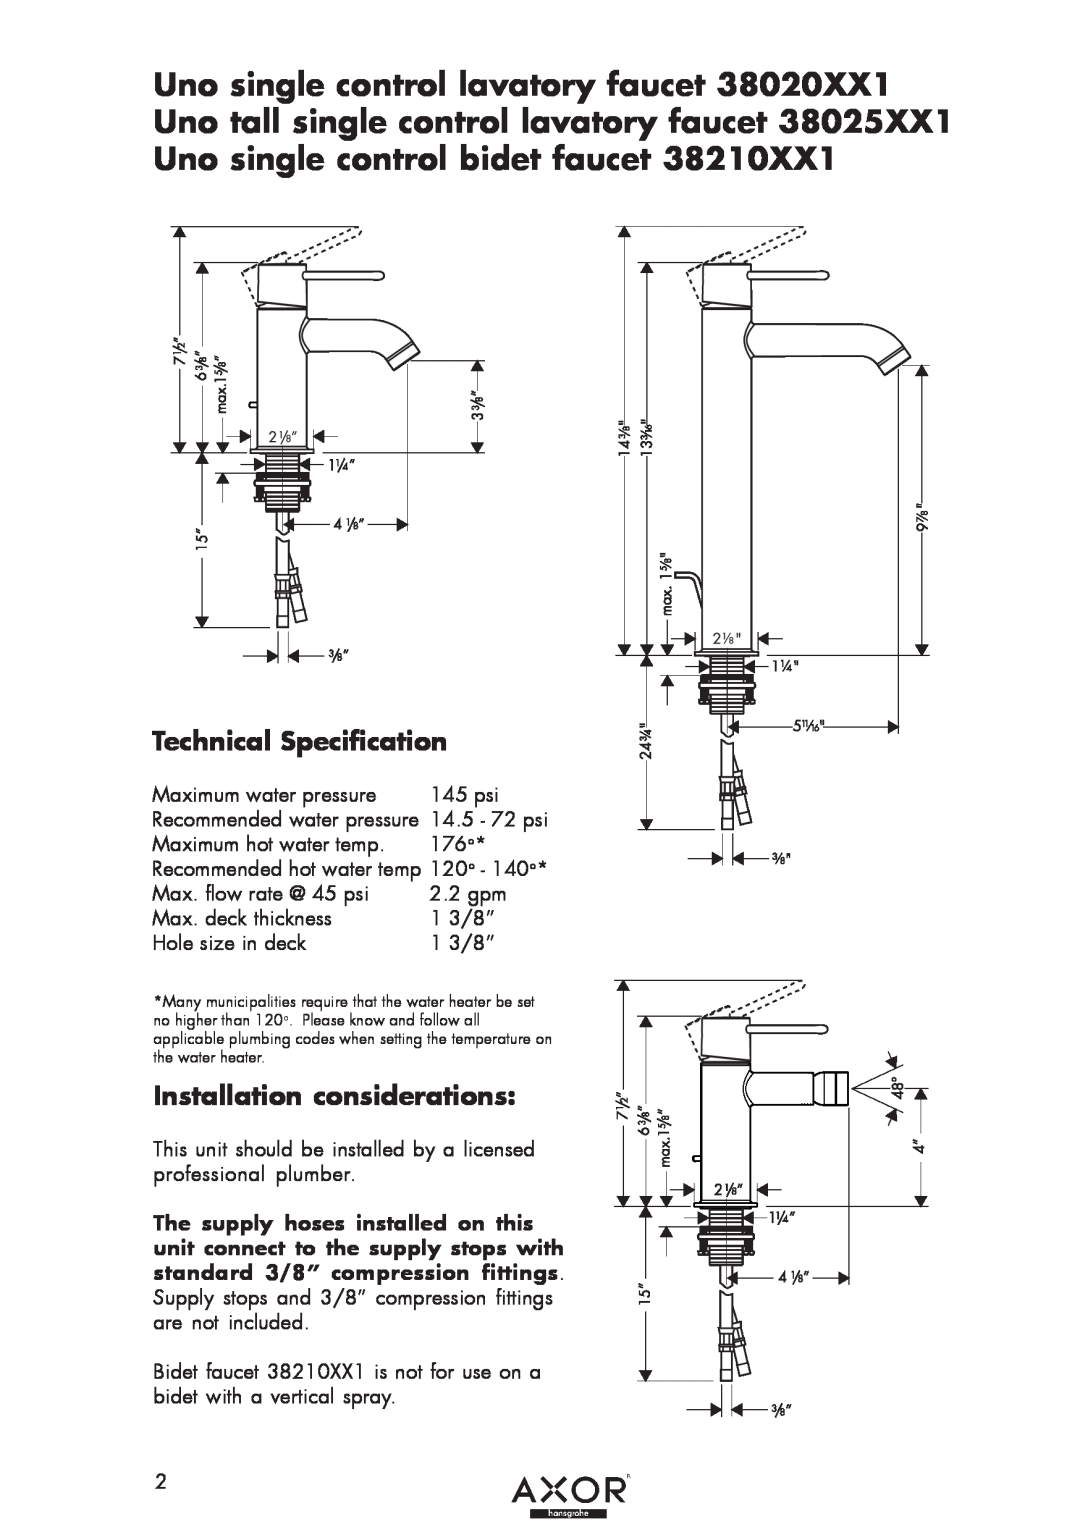 Hans Grohe 38025XX1, 38210XX1, 38020XX1 installation instructions Technical Specification, Installation considerations 